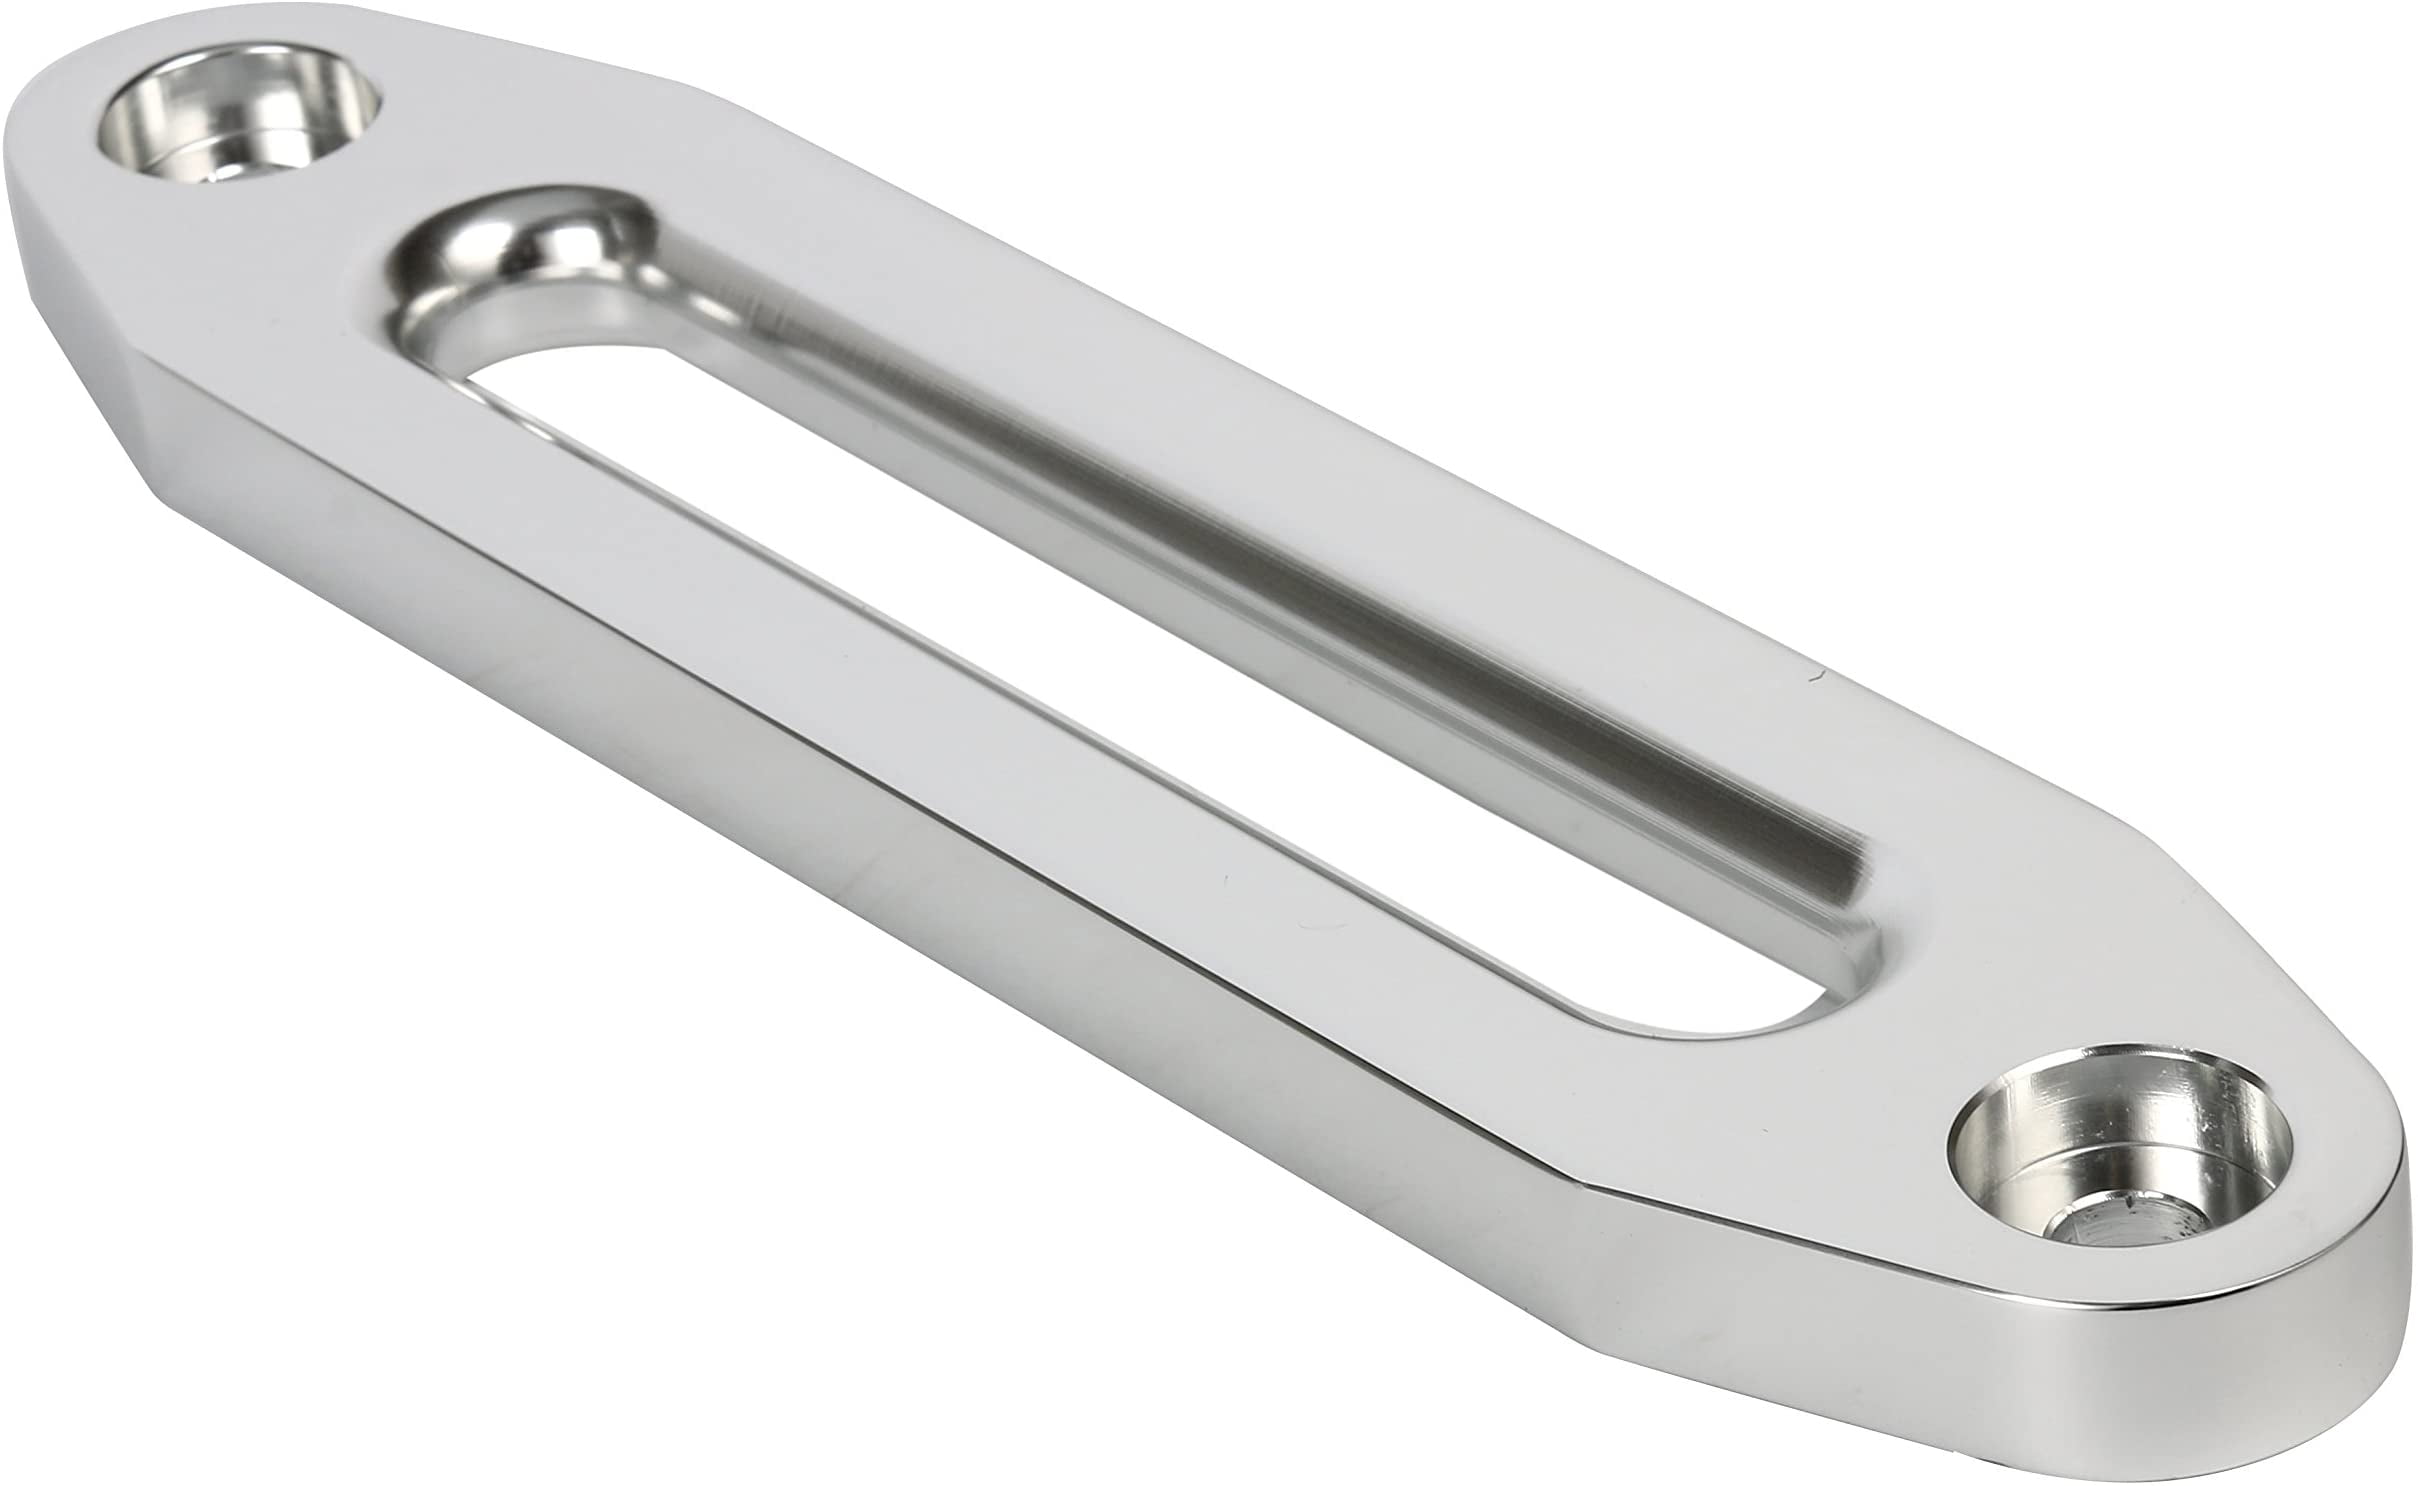 KKTECT 10 Billet Aluminum Hawse Fairlead 8000-15000 LBs for Synthetic Winch Rope Cable Accessories 